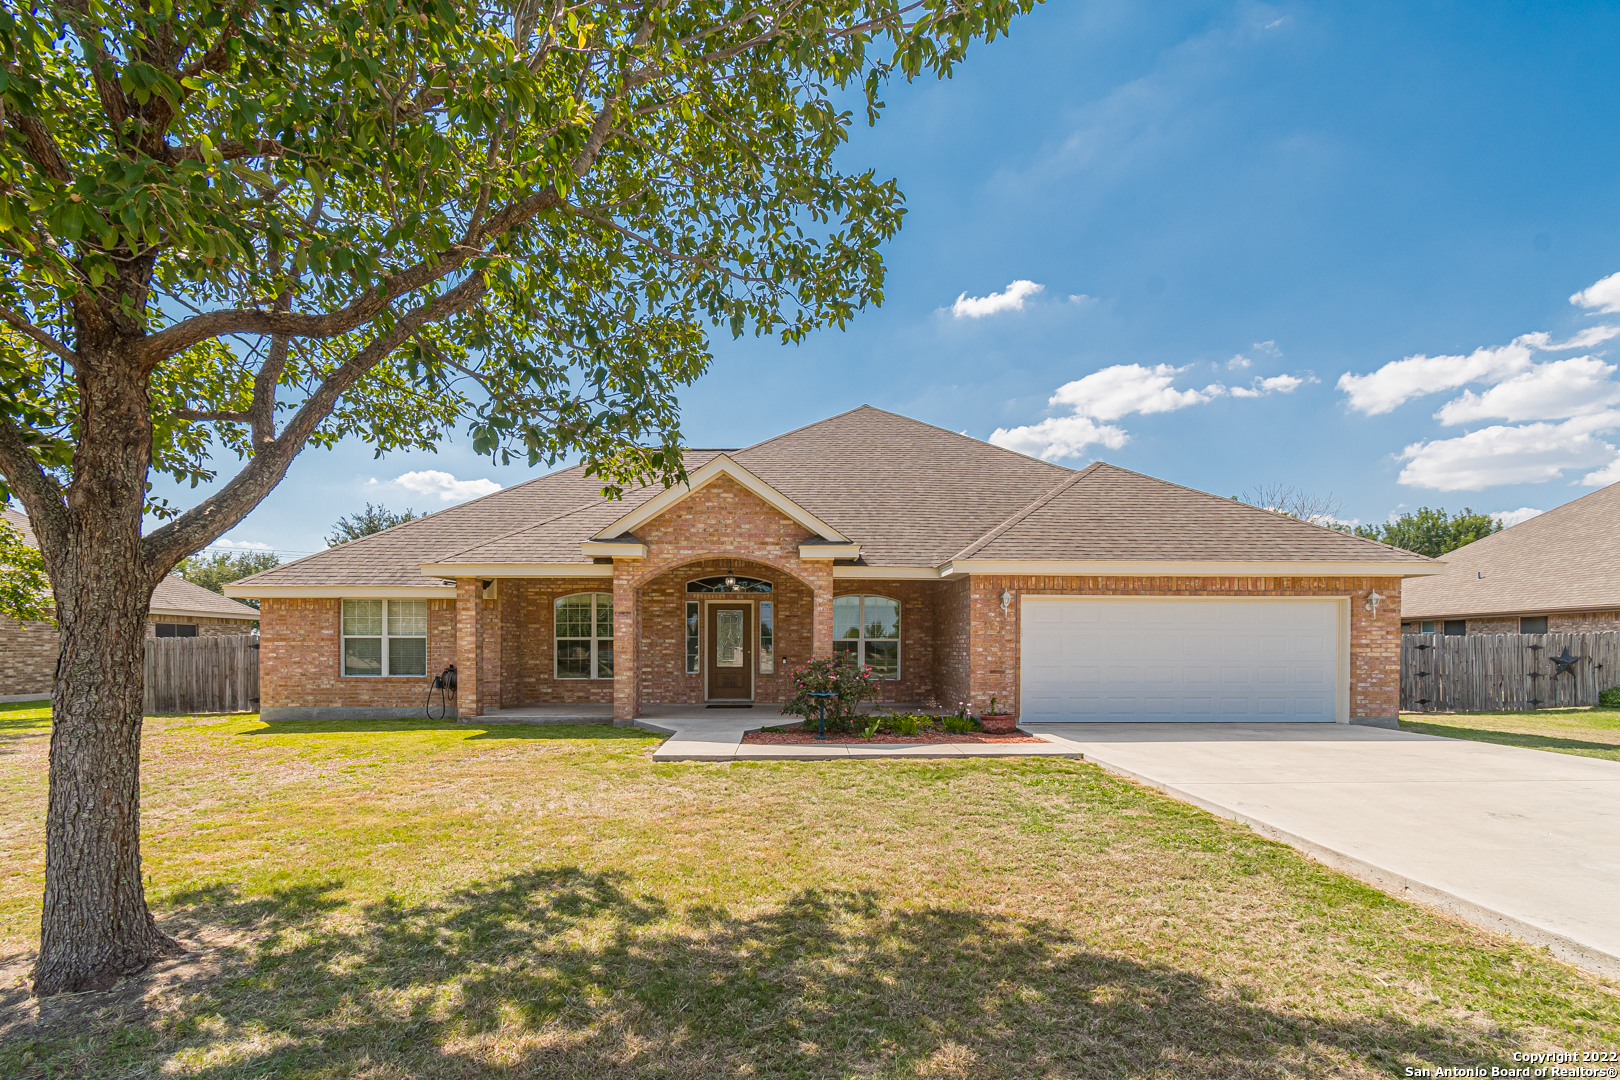 This immaculate home is located in the Navarro ISD. Perfectly set on a half acre lot in a very well kept community. Low taxes! Plenty of room between neighbors. It feels like home the minute you pull up. The living room is warm and inviting, centered by a wood-burning fireplace.  A spacious breakfast area and office looks out to the living area and flows into the kitchen, where you'll find a breakfast bar. The master bedroom is large with dual closets. The spacious master bath make this entire room an owner's retreat! You'll enjoy the back patio both morning and night, so bring your coffee and wine, and make this house your home.  *virtual stage photos included